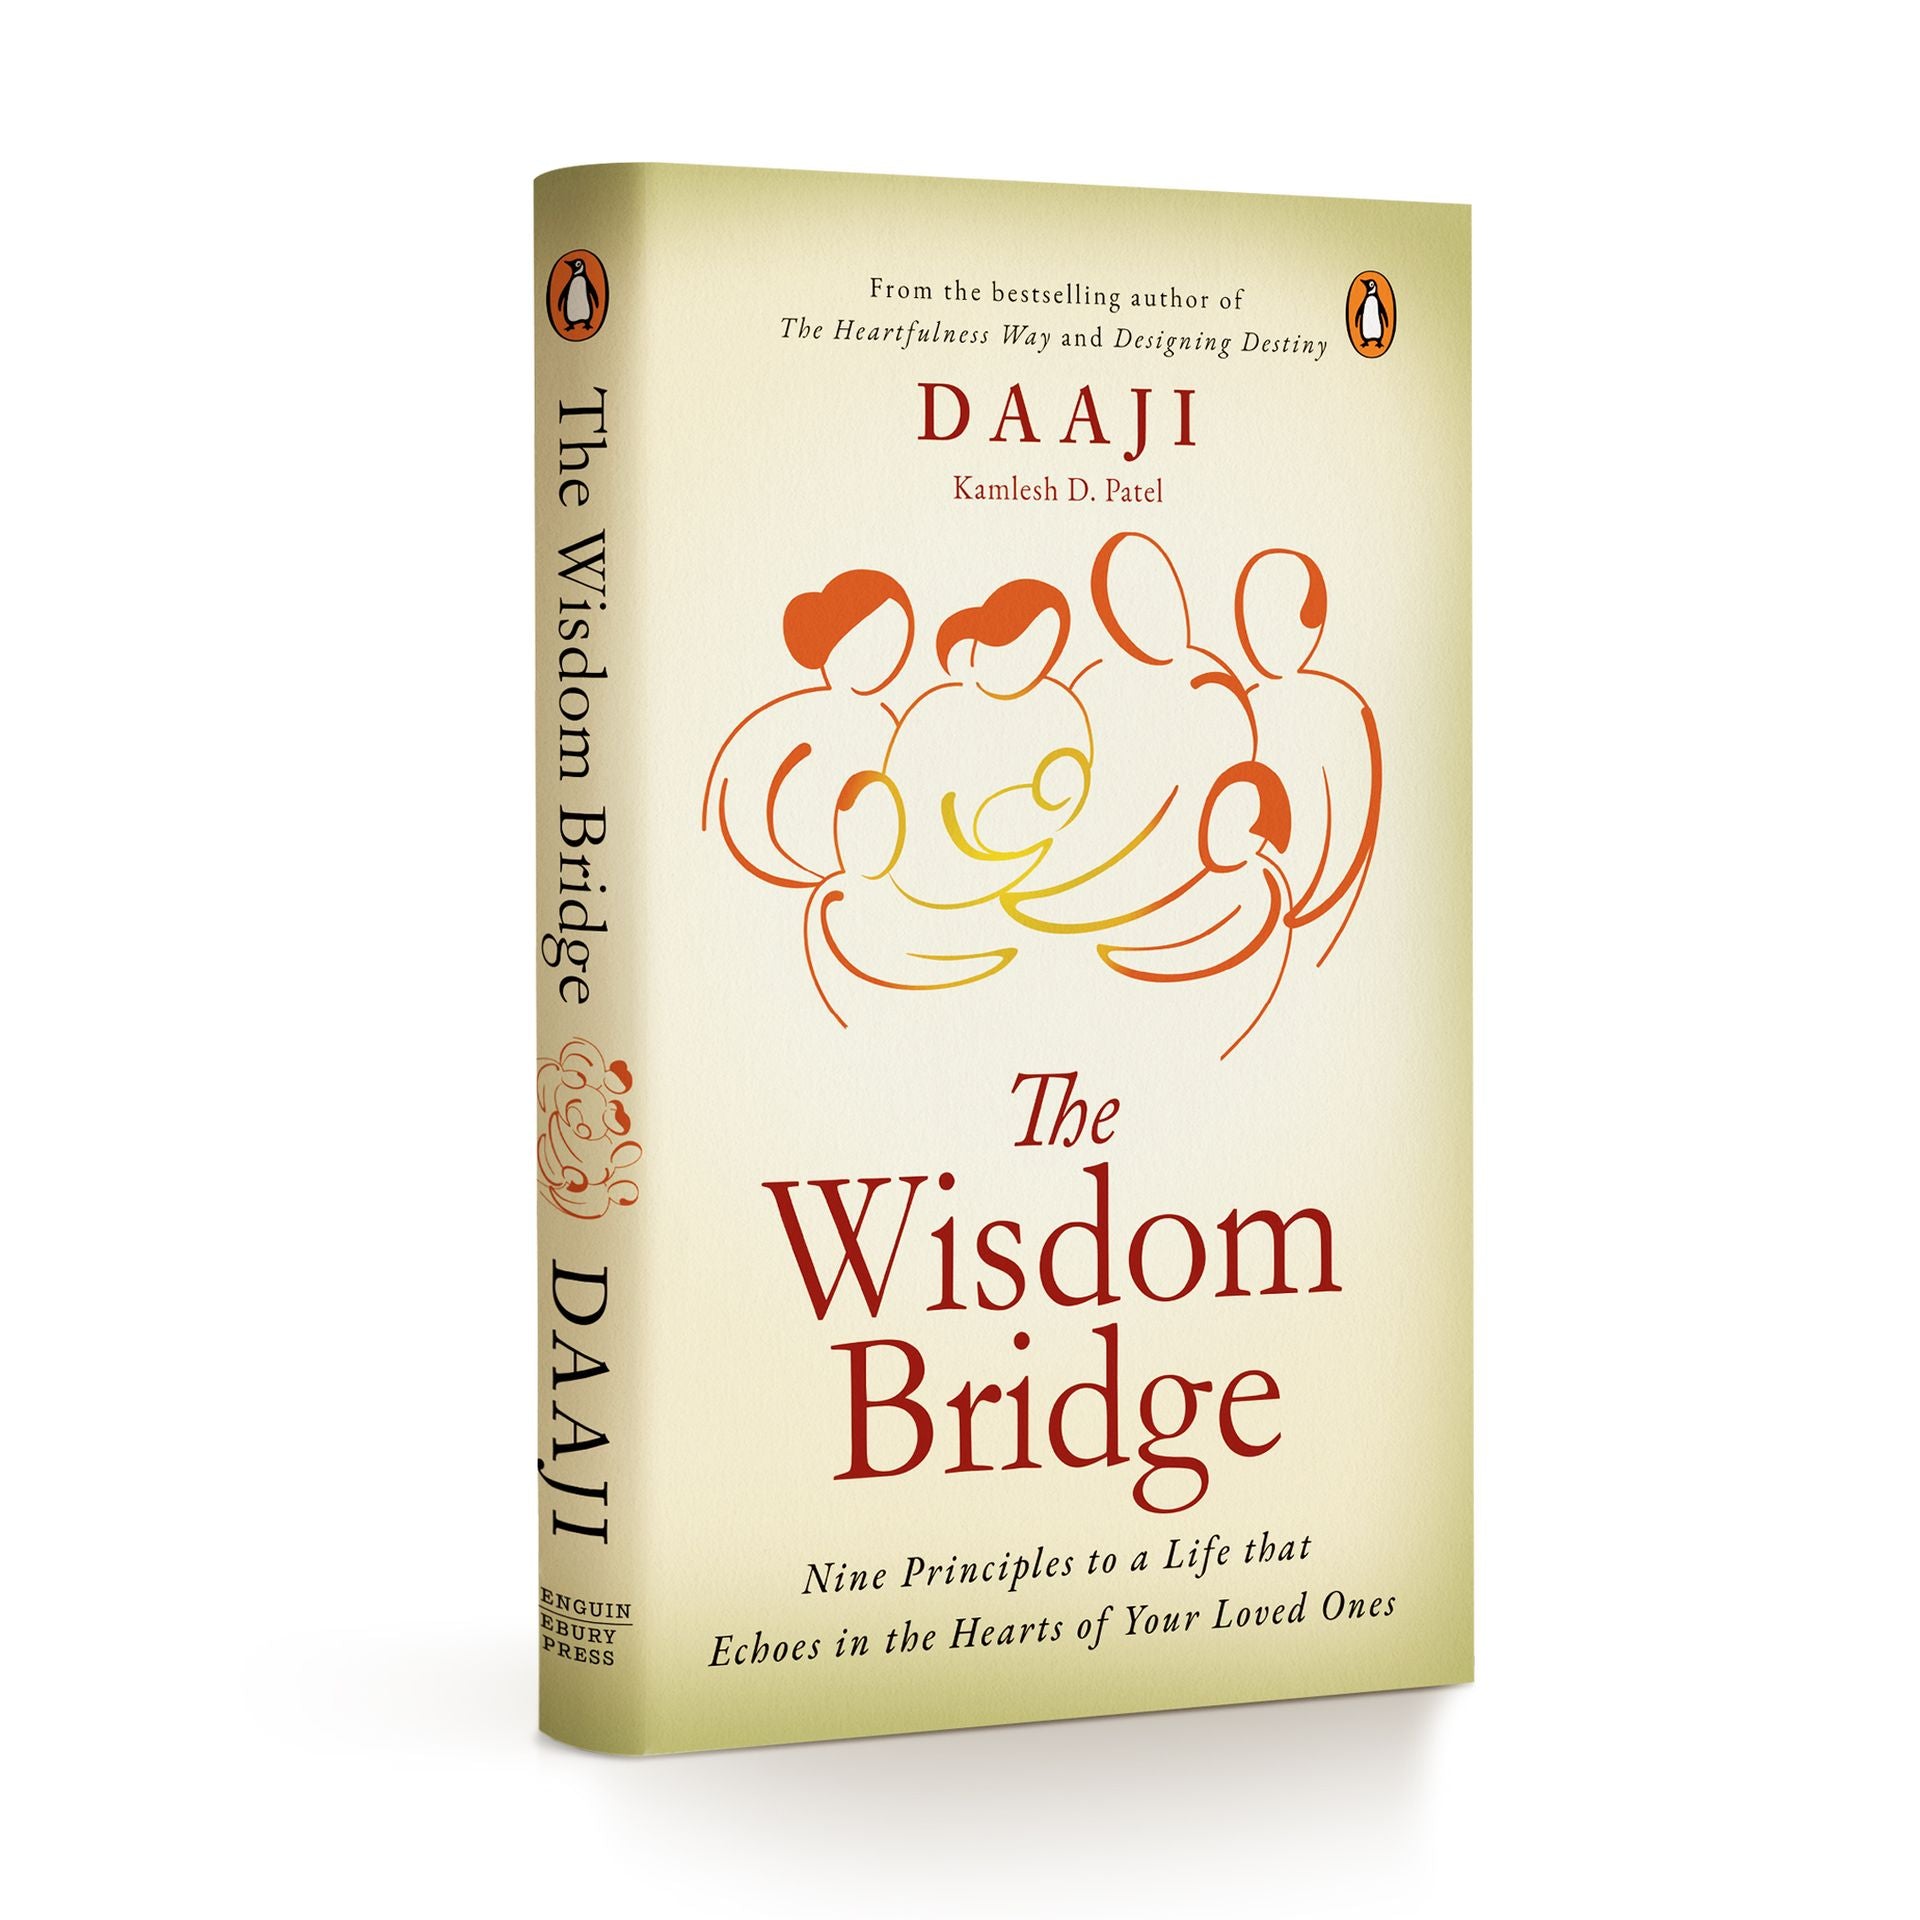 The Wisdom Bridge: Nine Principles to a Life that Echoes in the Hearts of Your Loved Ones